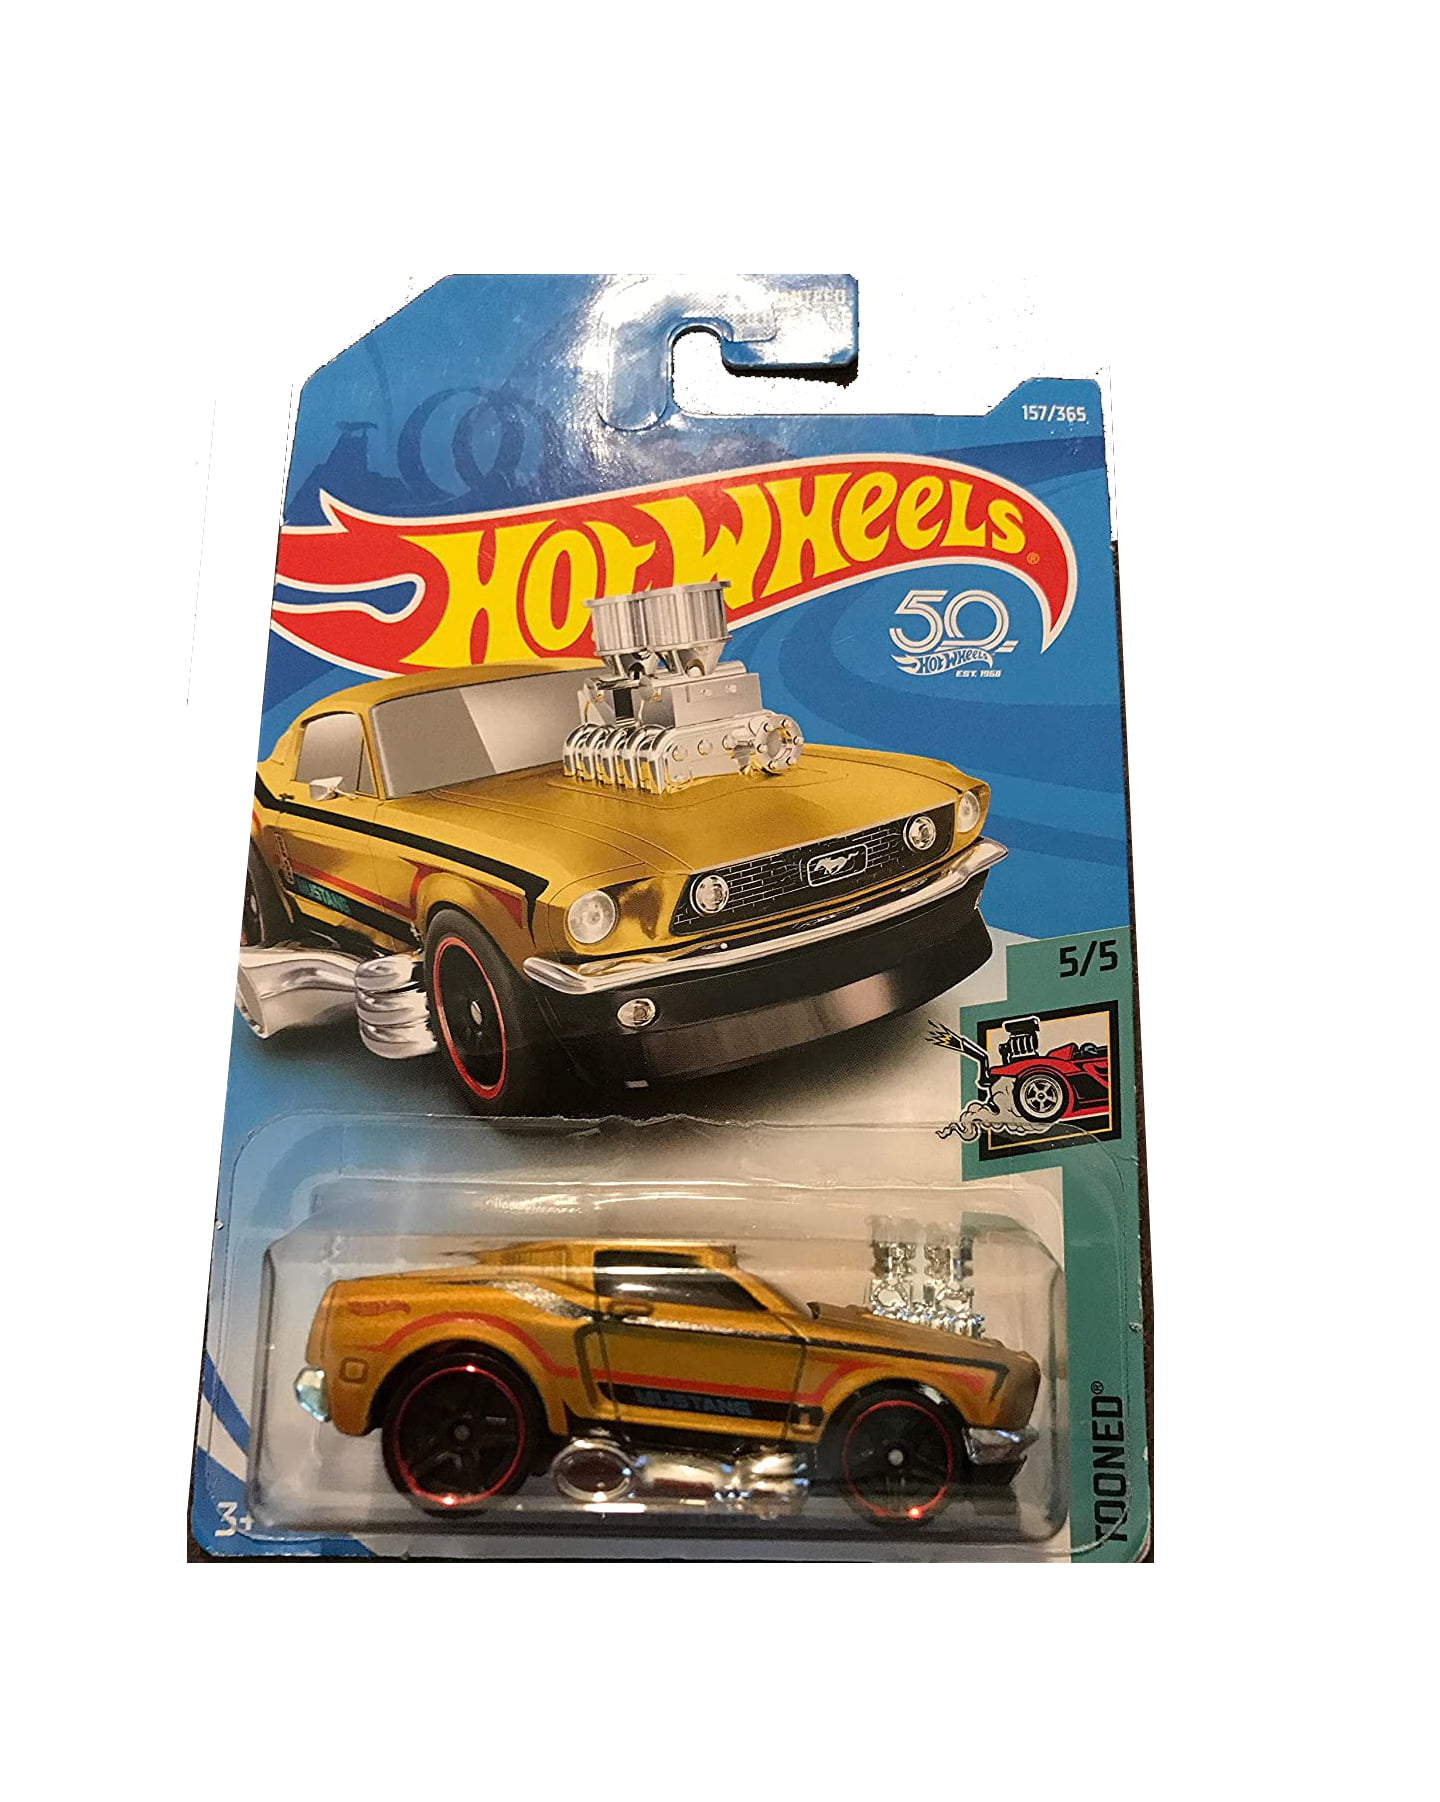 Details about   '68 Ford MUSTANG #157 US 50✰Satin Gold;red rim pr5✰TOONED✰2018 Hot Wheels G 